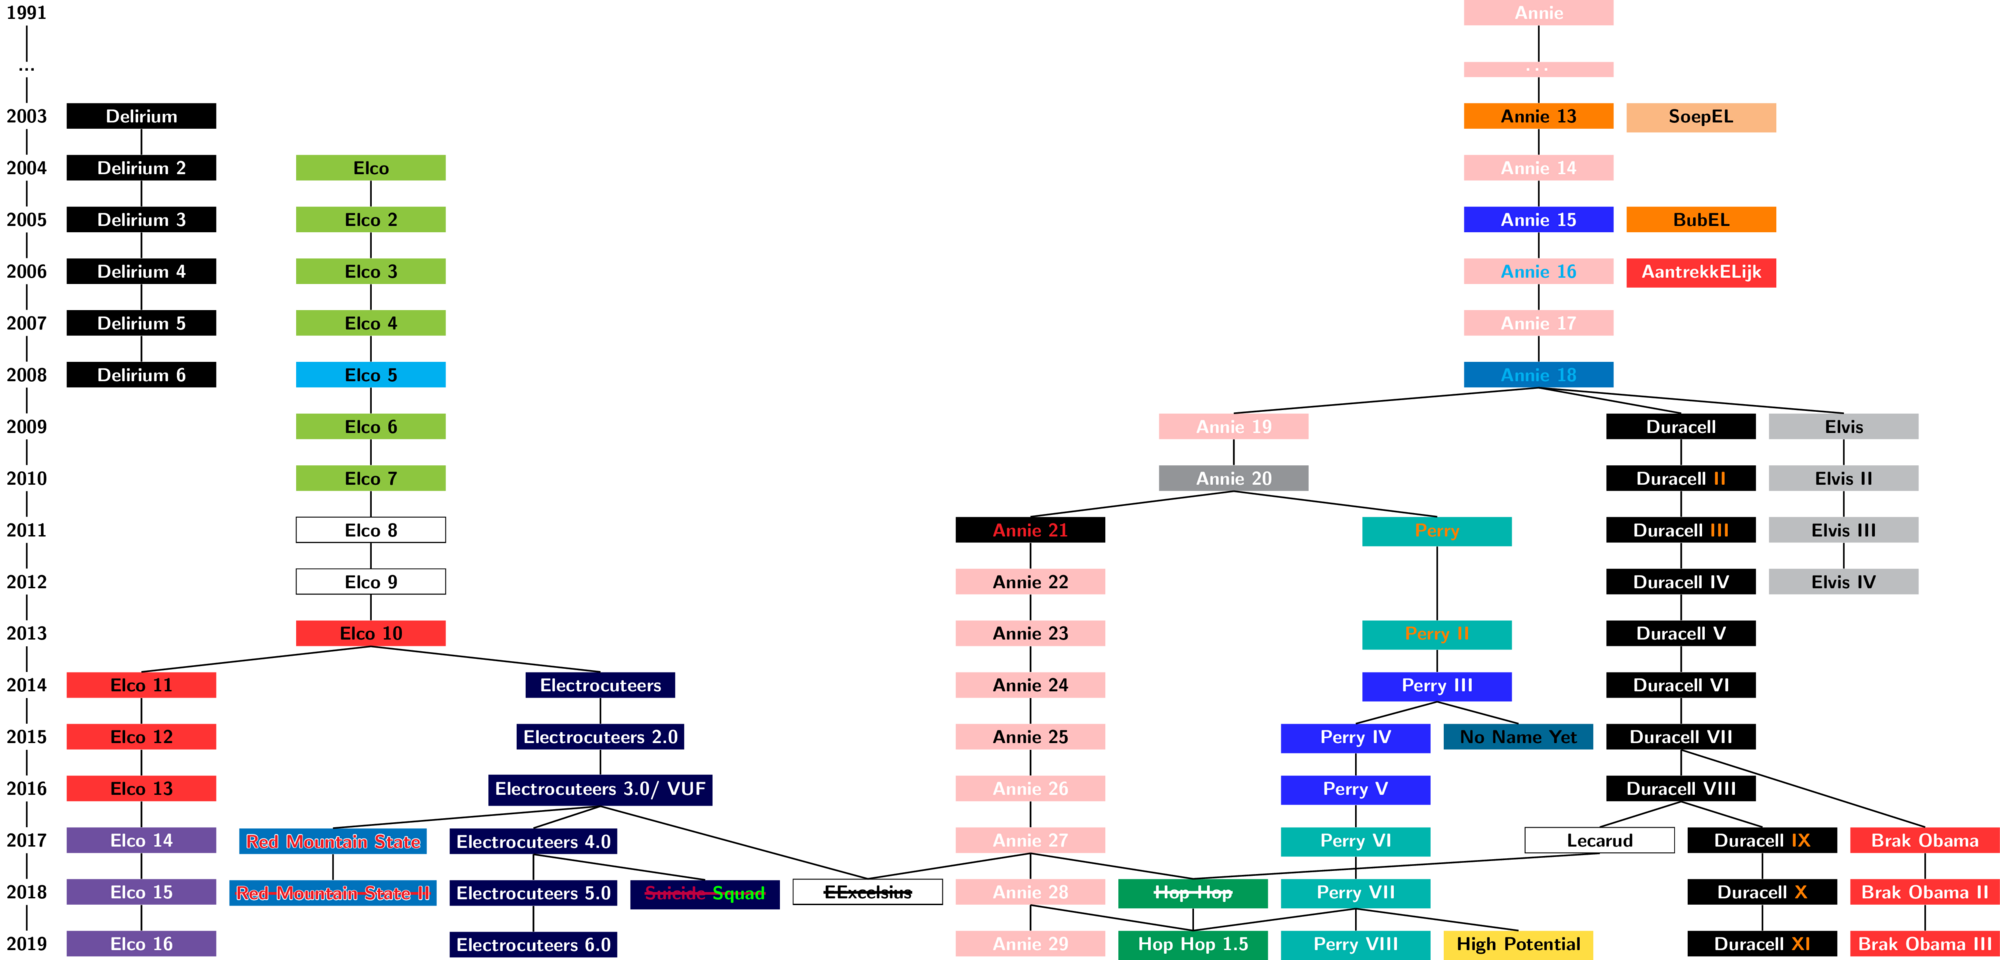 An exhaustive family tree of the do-groups of the Bachelor Electrical Engineering from 2003 to 2019.